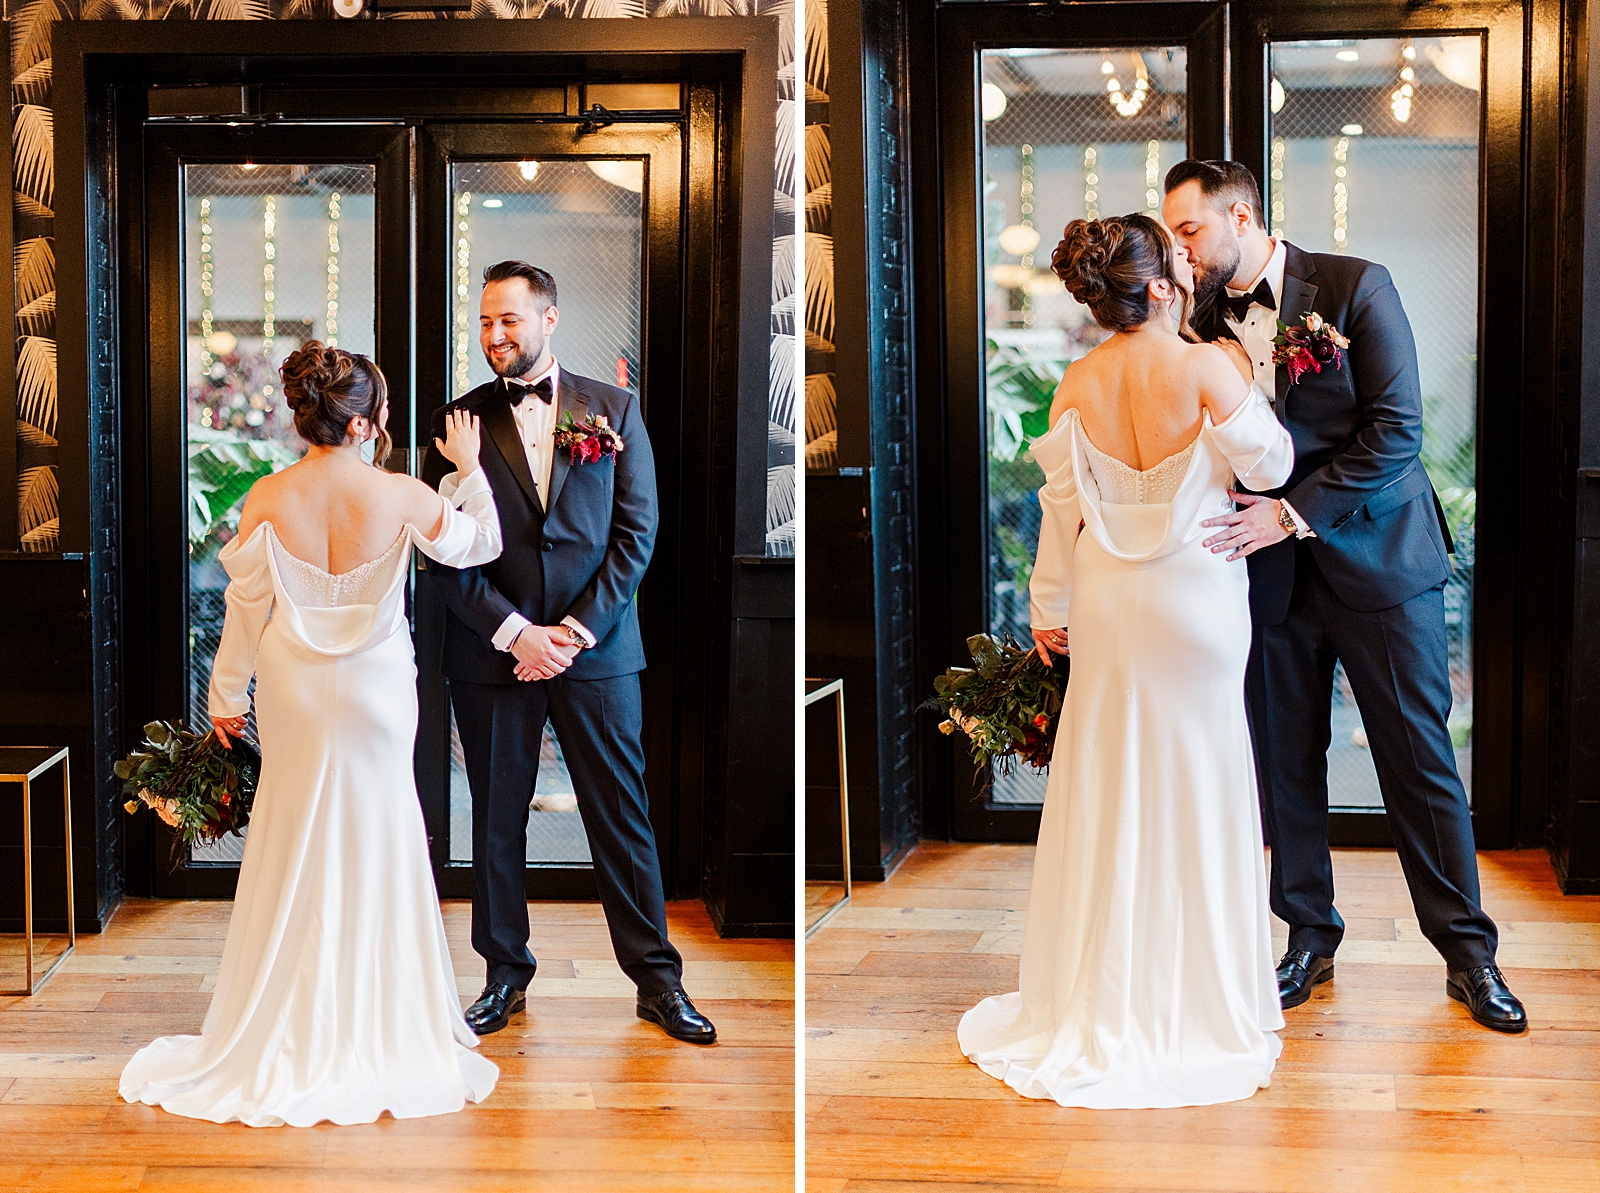 Left photo: Full body shot of the groom smiling at the bride. 
Right photo: Full body shot of the bride and groom sharing a kiss. 